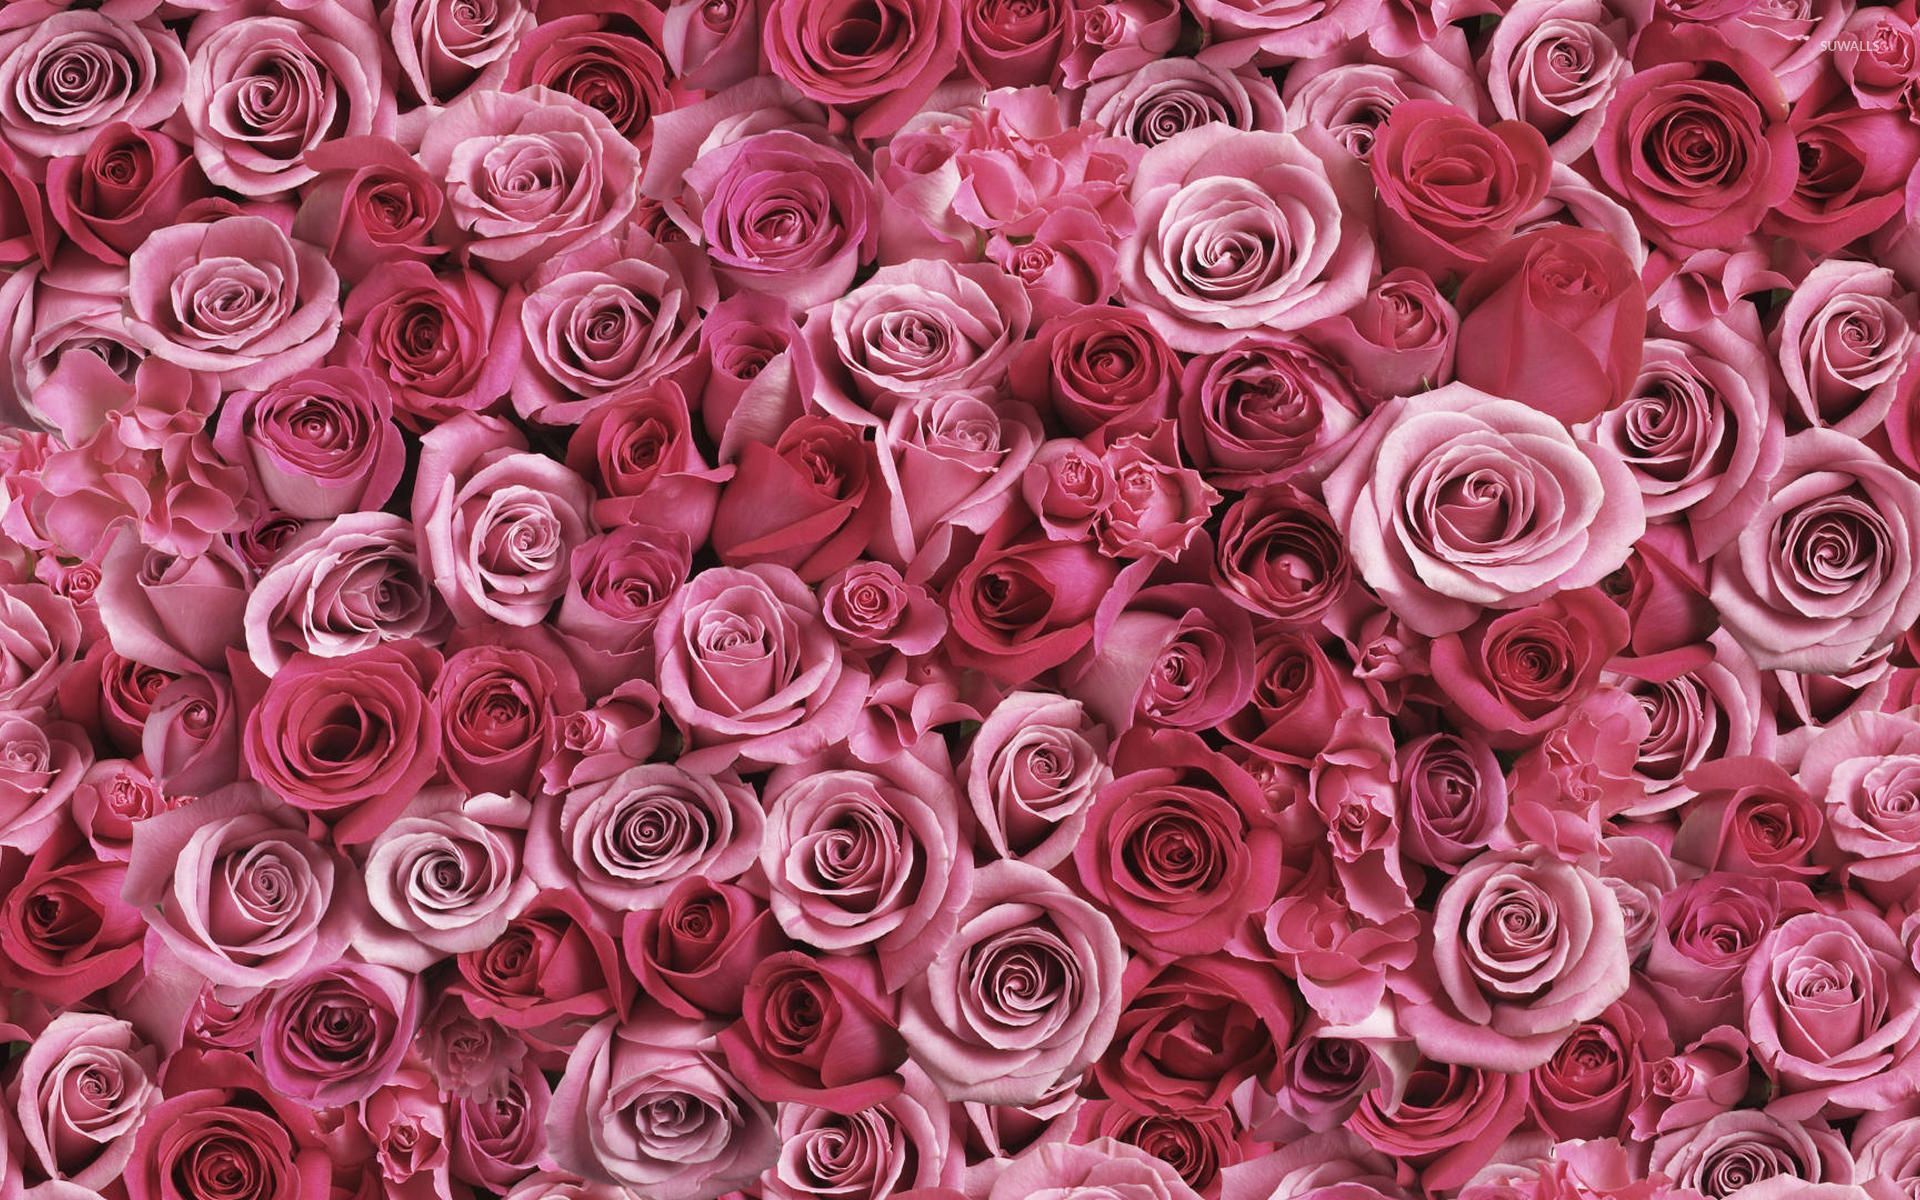 Pink roses photo